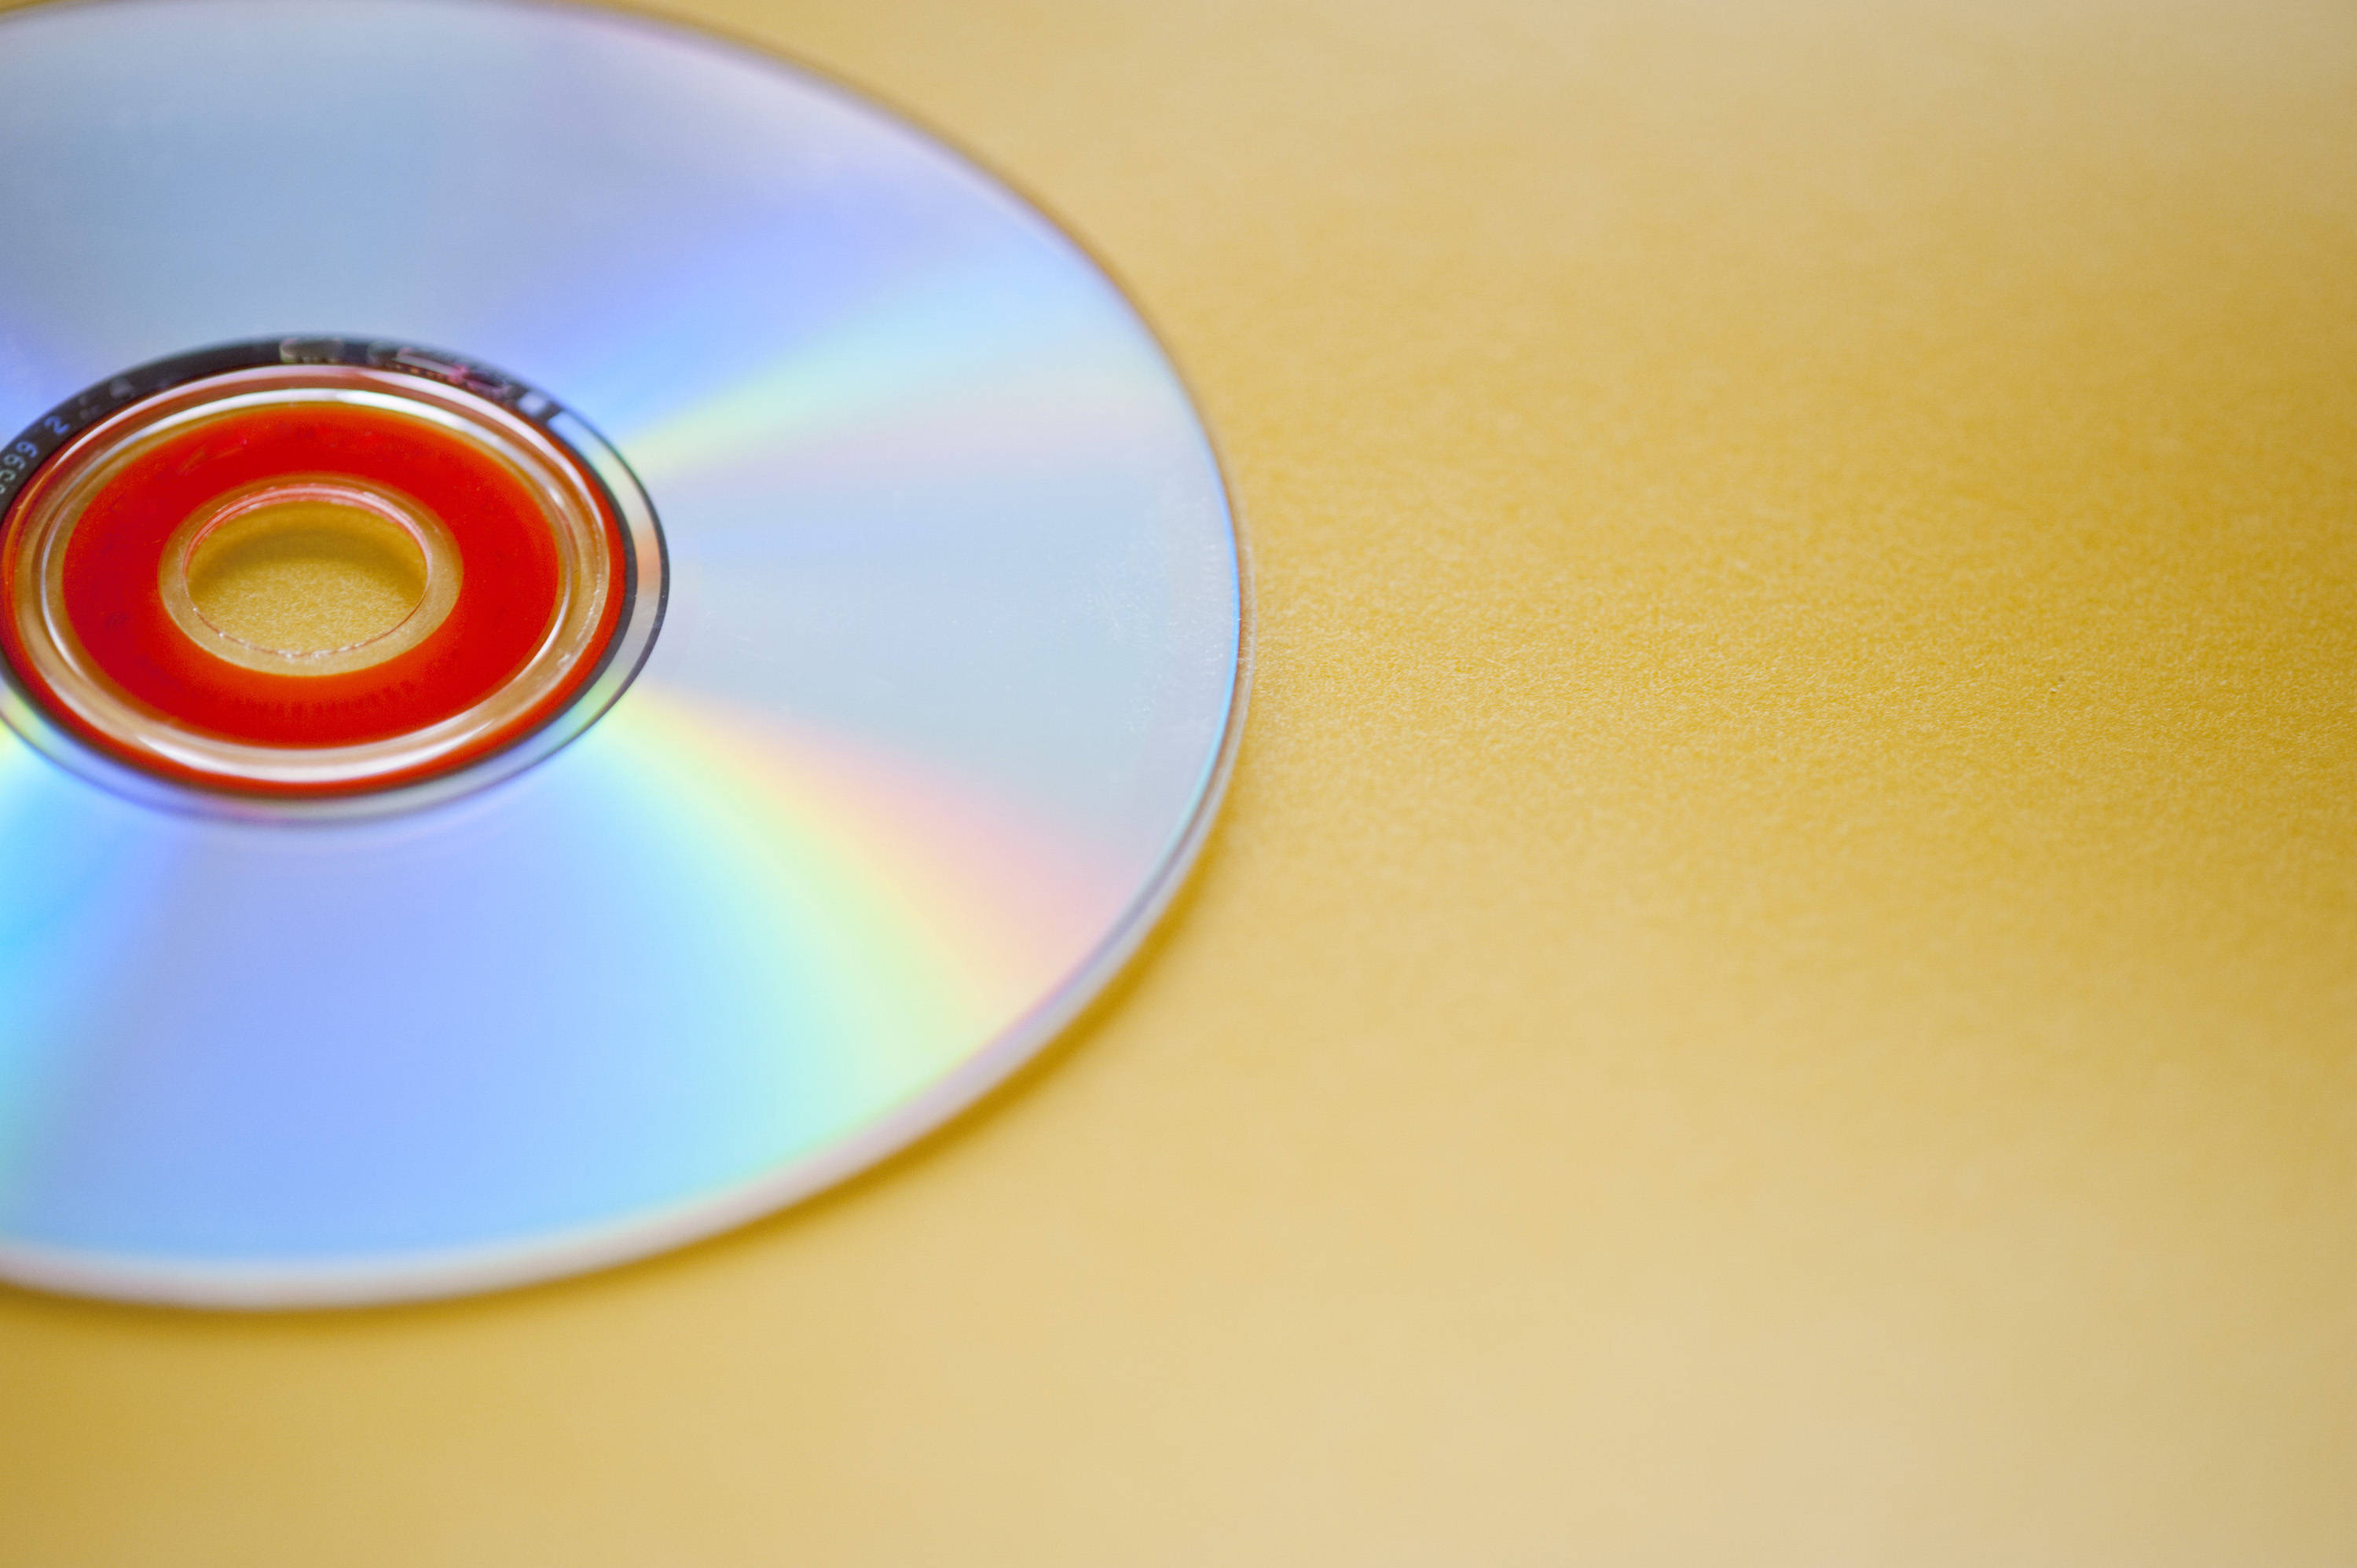 Stock Photo Pactdisc Imagelive